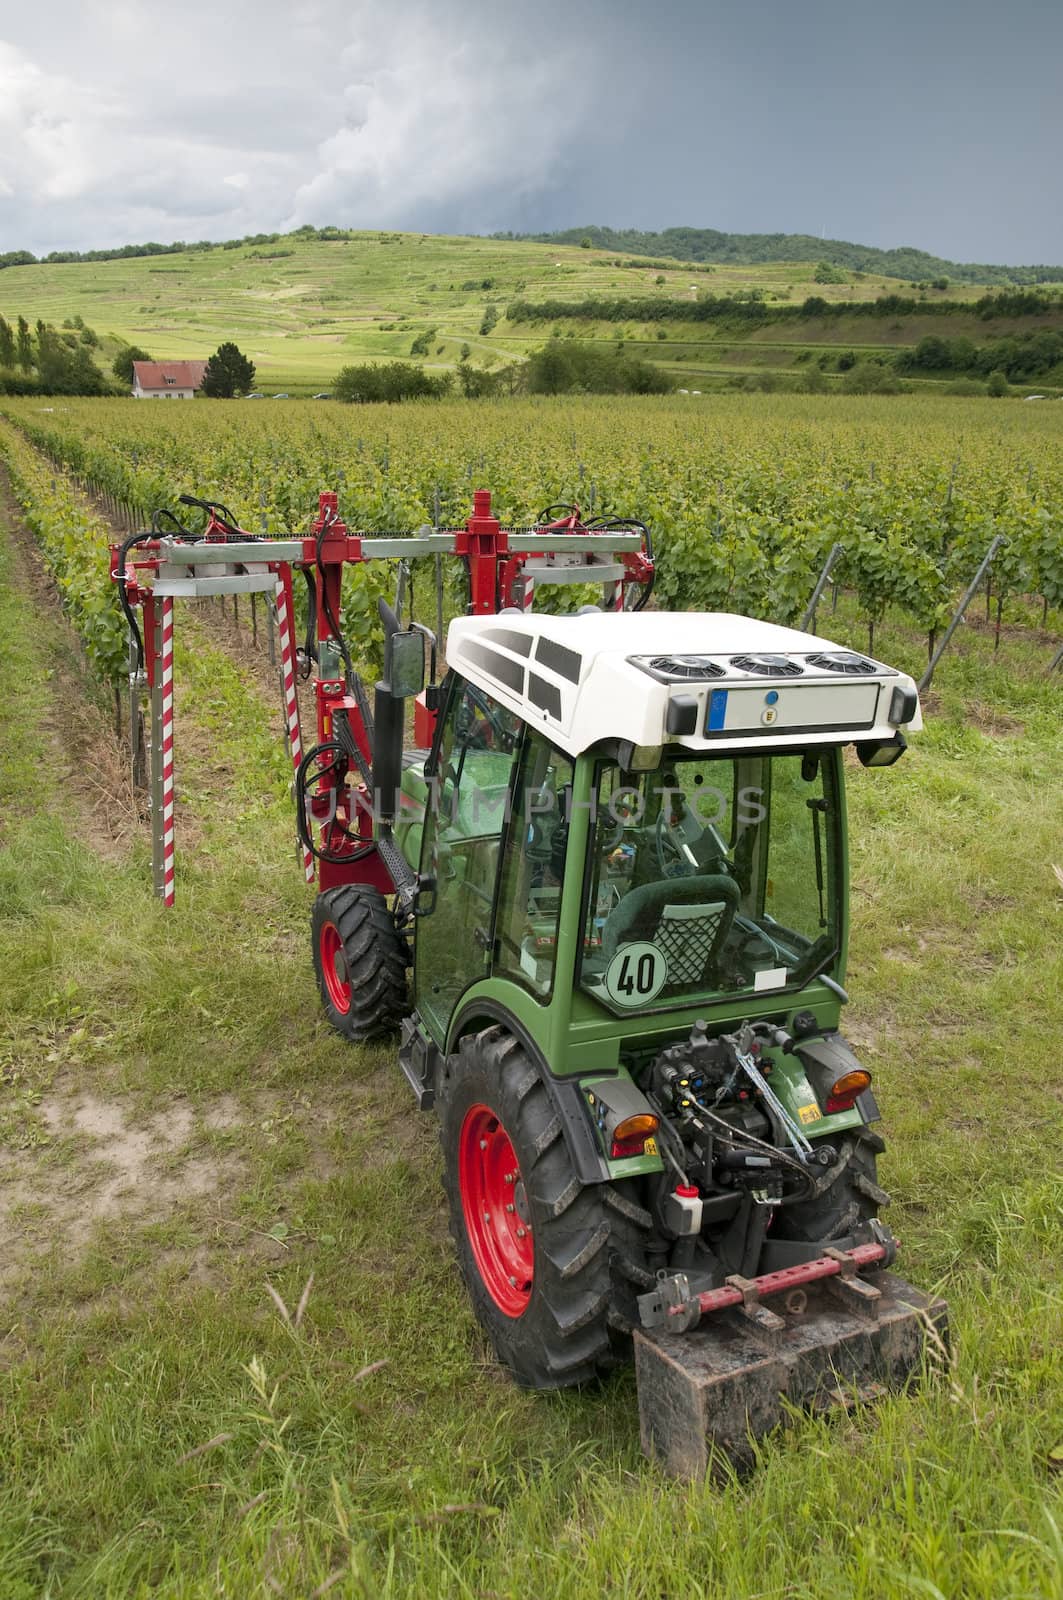 Tractor in the Vineyard by Rainman